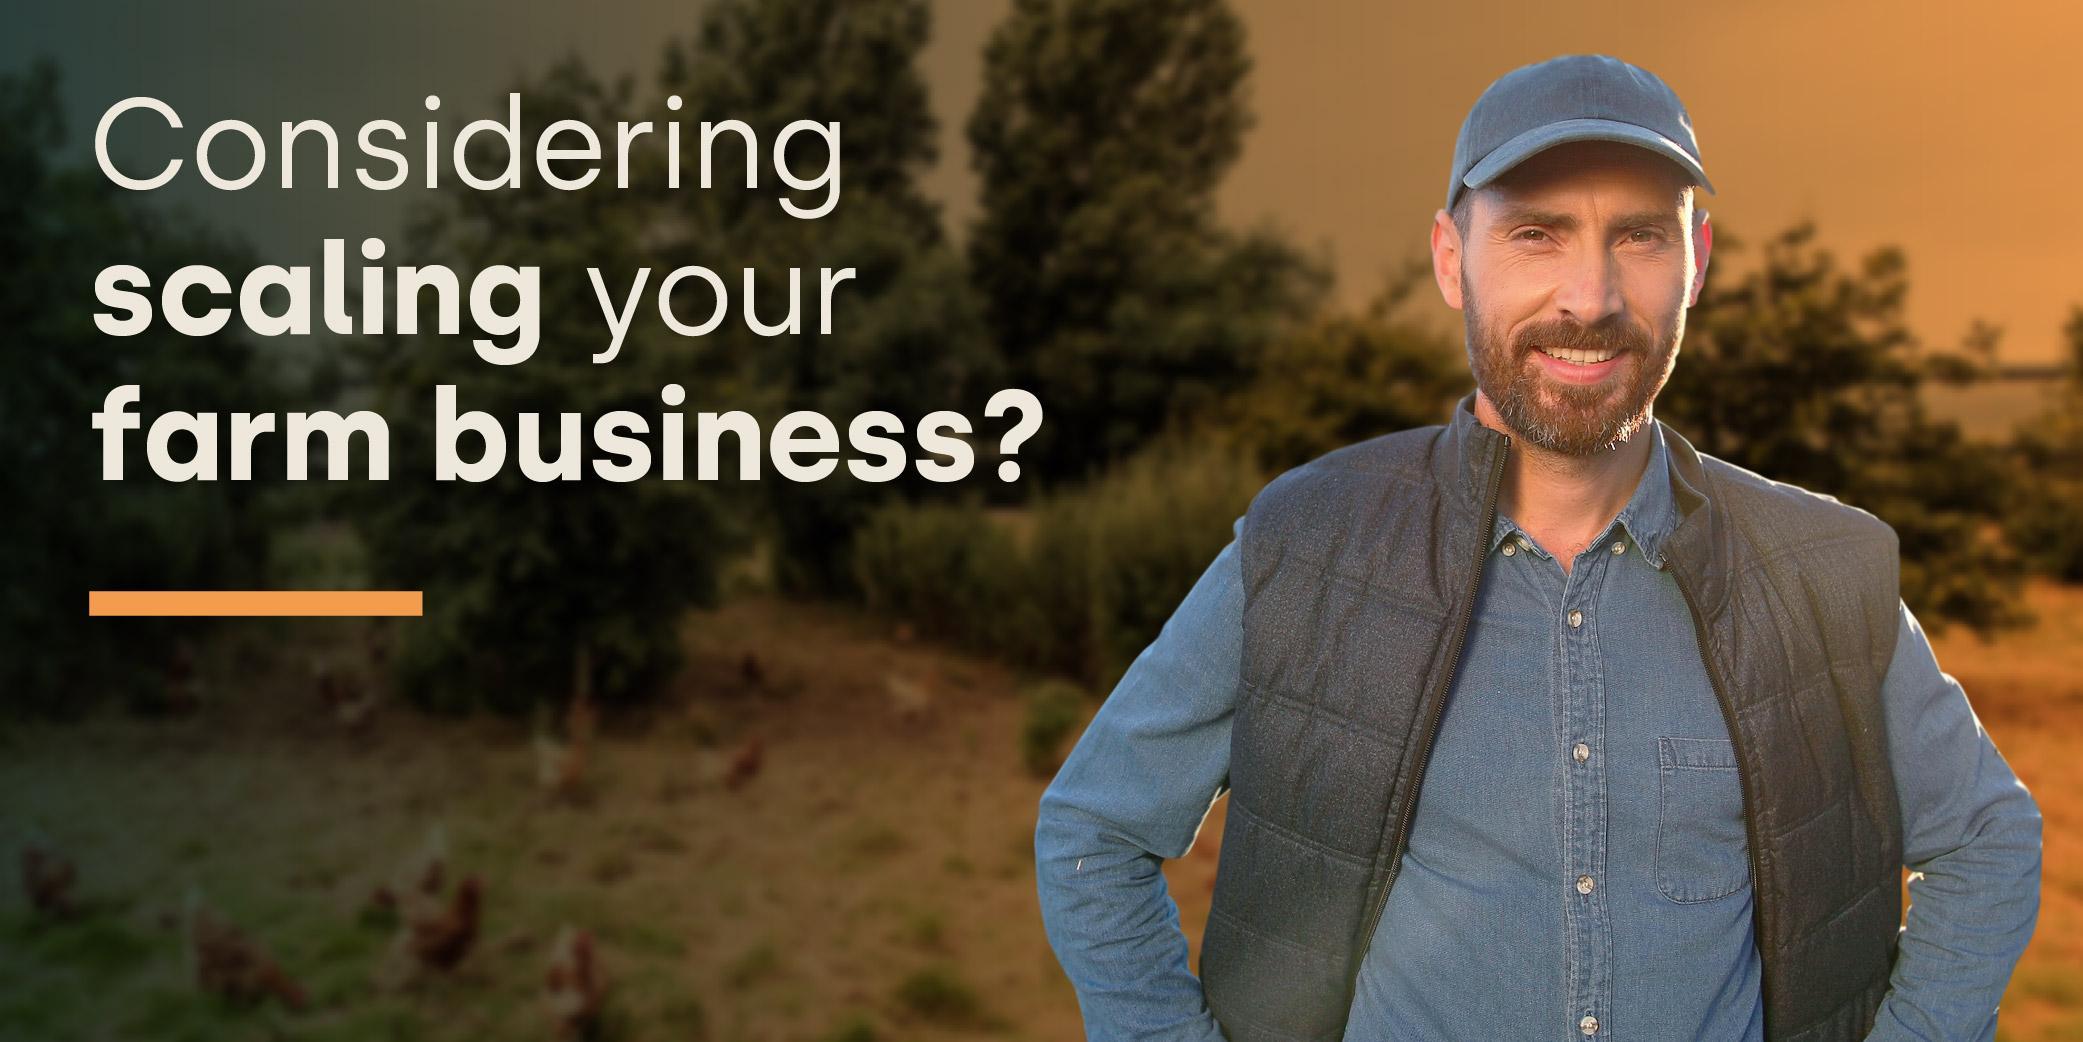 What should you consider if you are rapidly scaling your farm business? blog post graphic